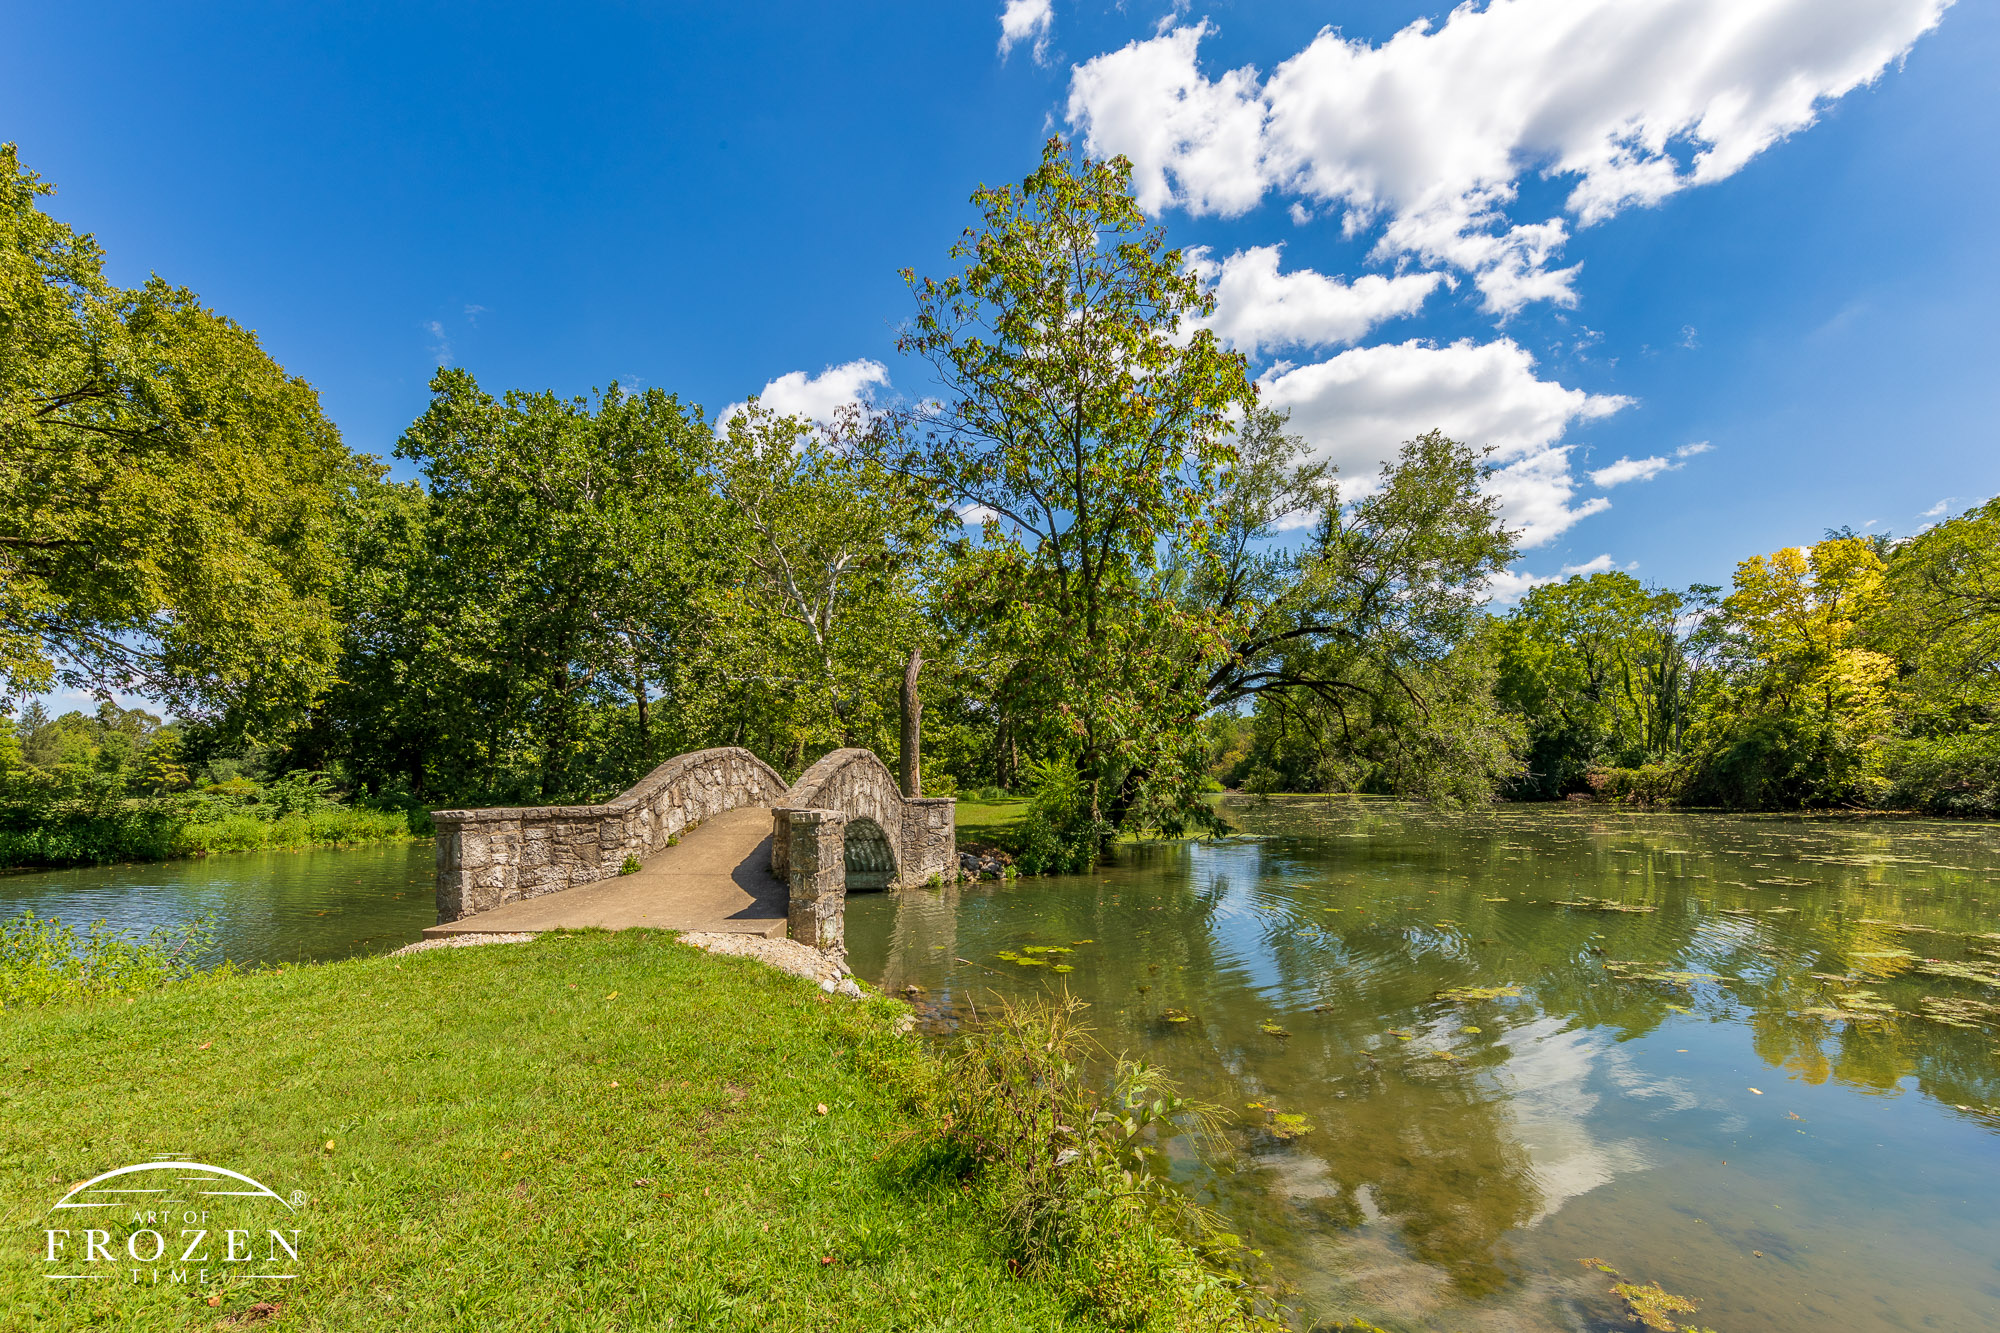 A perfect day at Eastwood Lake MetroParks as stone bridges invite visitors to explore the park’s paths through mature trees under amazing skies